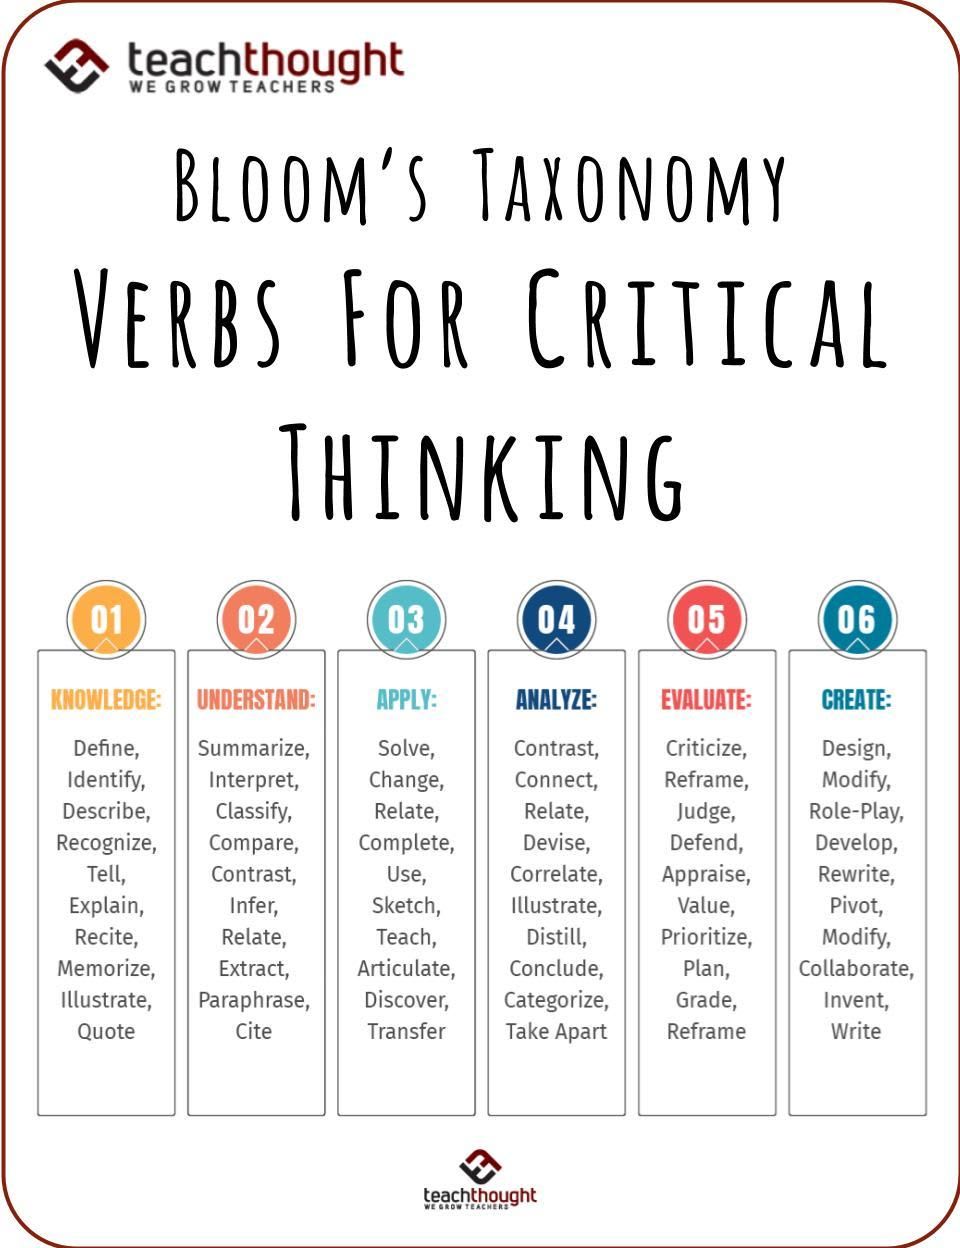 100+ Bloom's Taxonomy Verbs For Critical Thinking